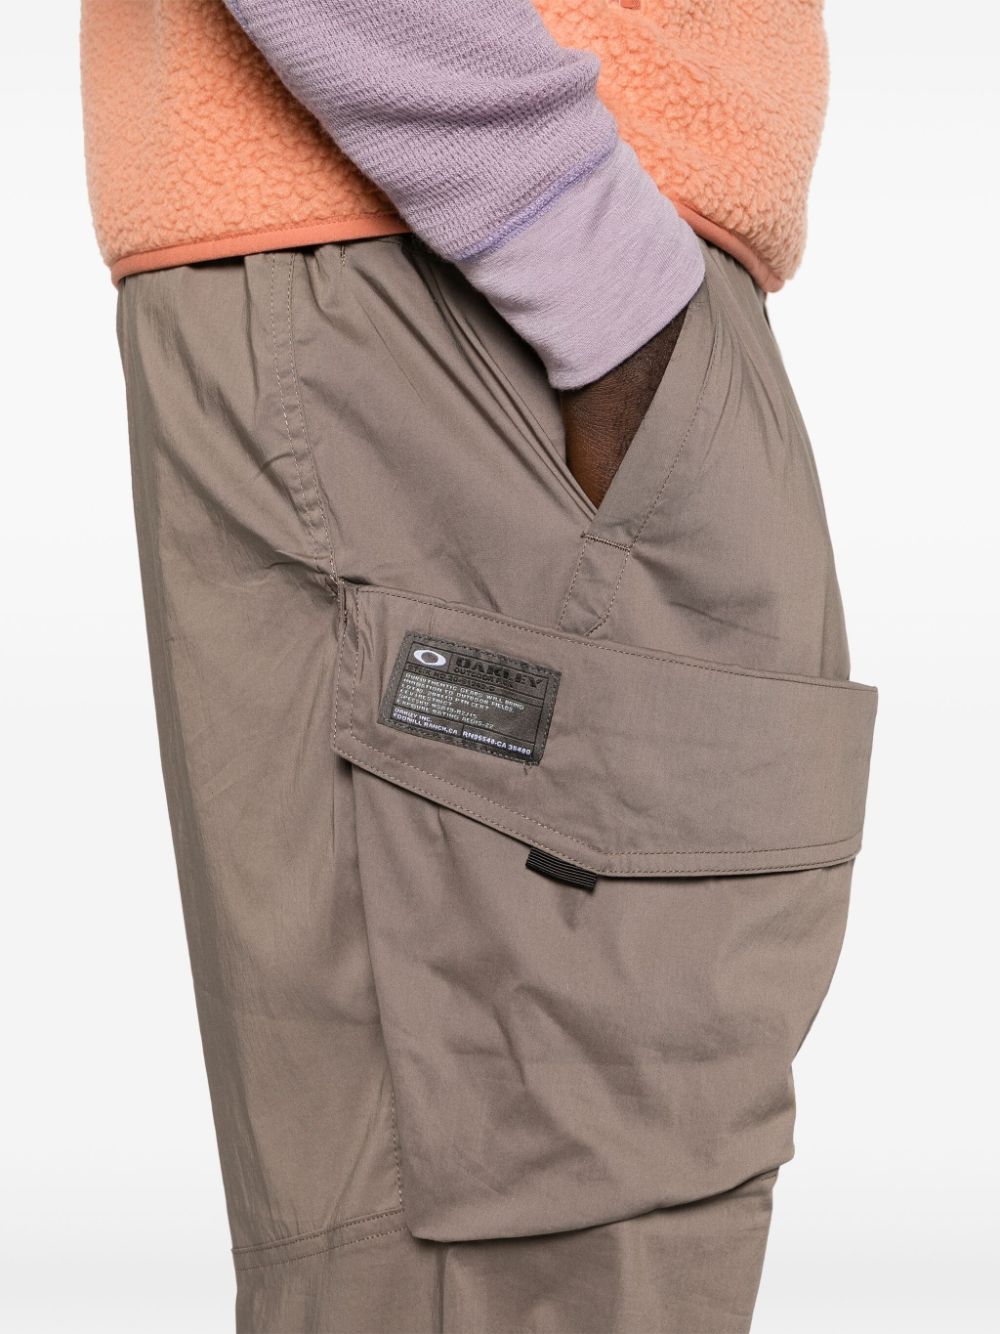 FGL Tool Box cargo trousers<BR/><BR/><BR/>